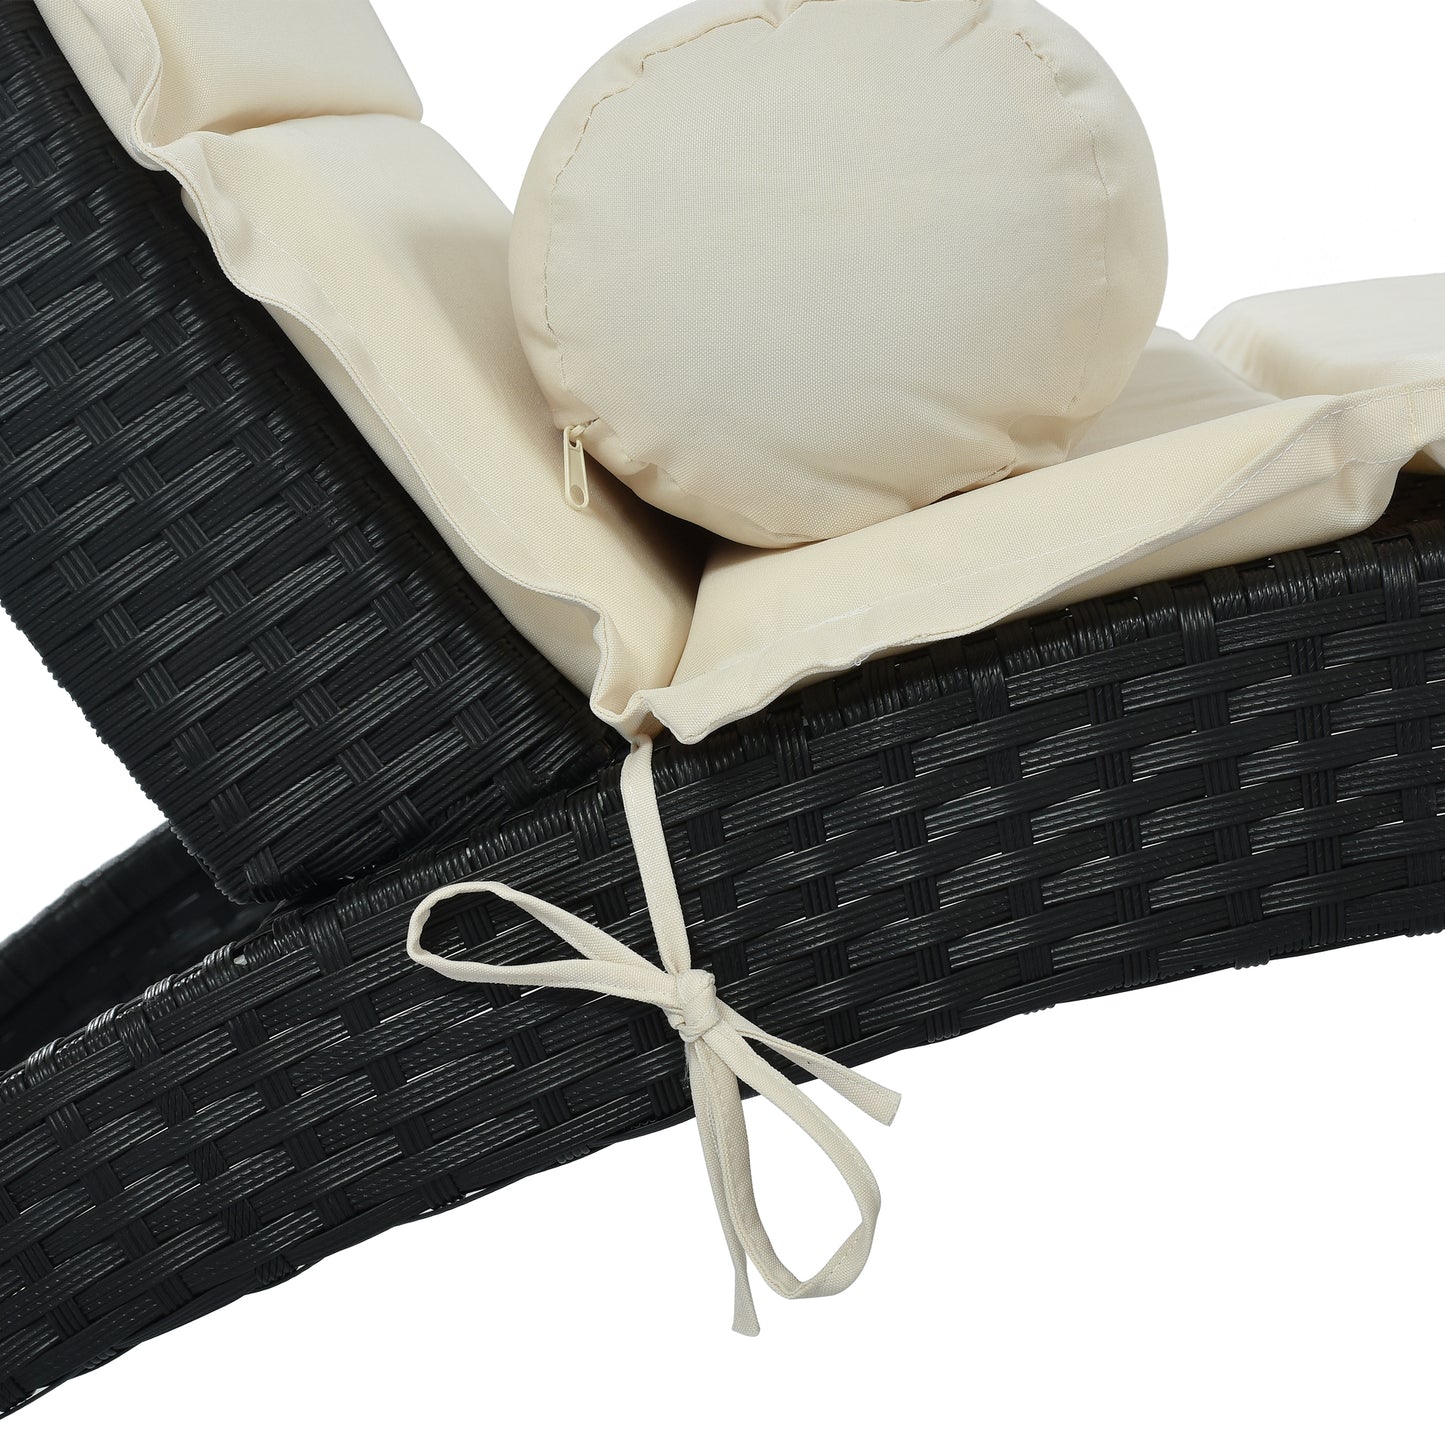 GO Patio Wicker Sun Lounger, PE Rattan Foldable Chaise Lounger with Removable Cushion and Bolster Pillow, Black Wicker and Beige Cushion (2 sets)